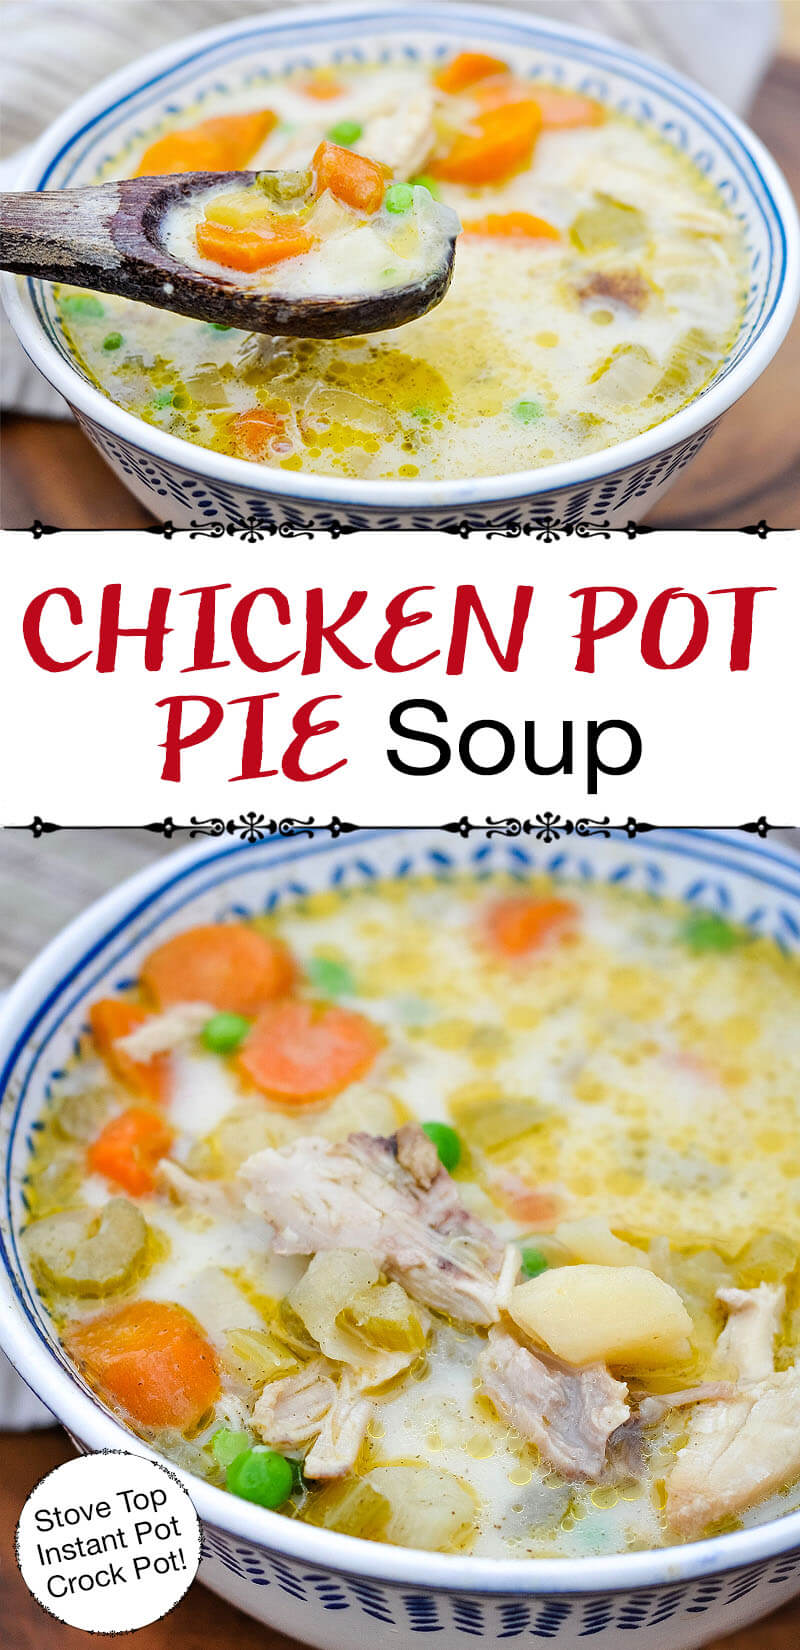 photo collage of colorful chicken and veggie soup with text overlay: "Chicken Pot Pie Soup (Stove Top Instant Pot Crock Pot!)"